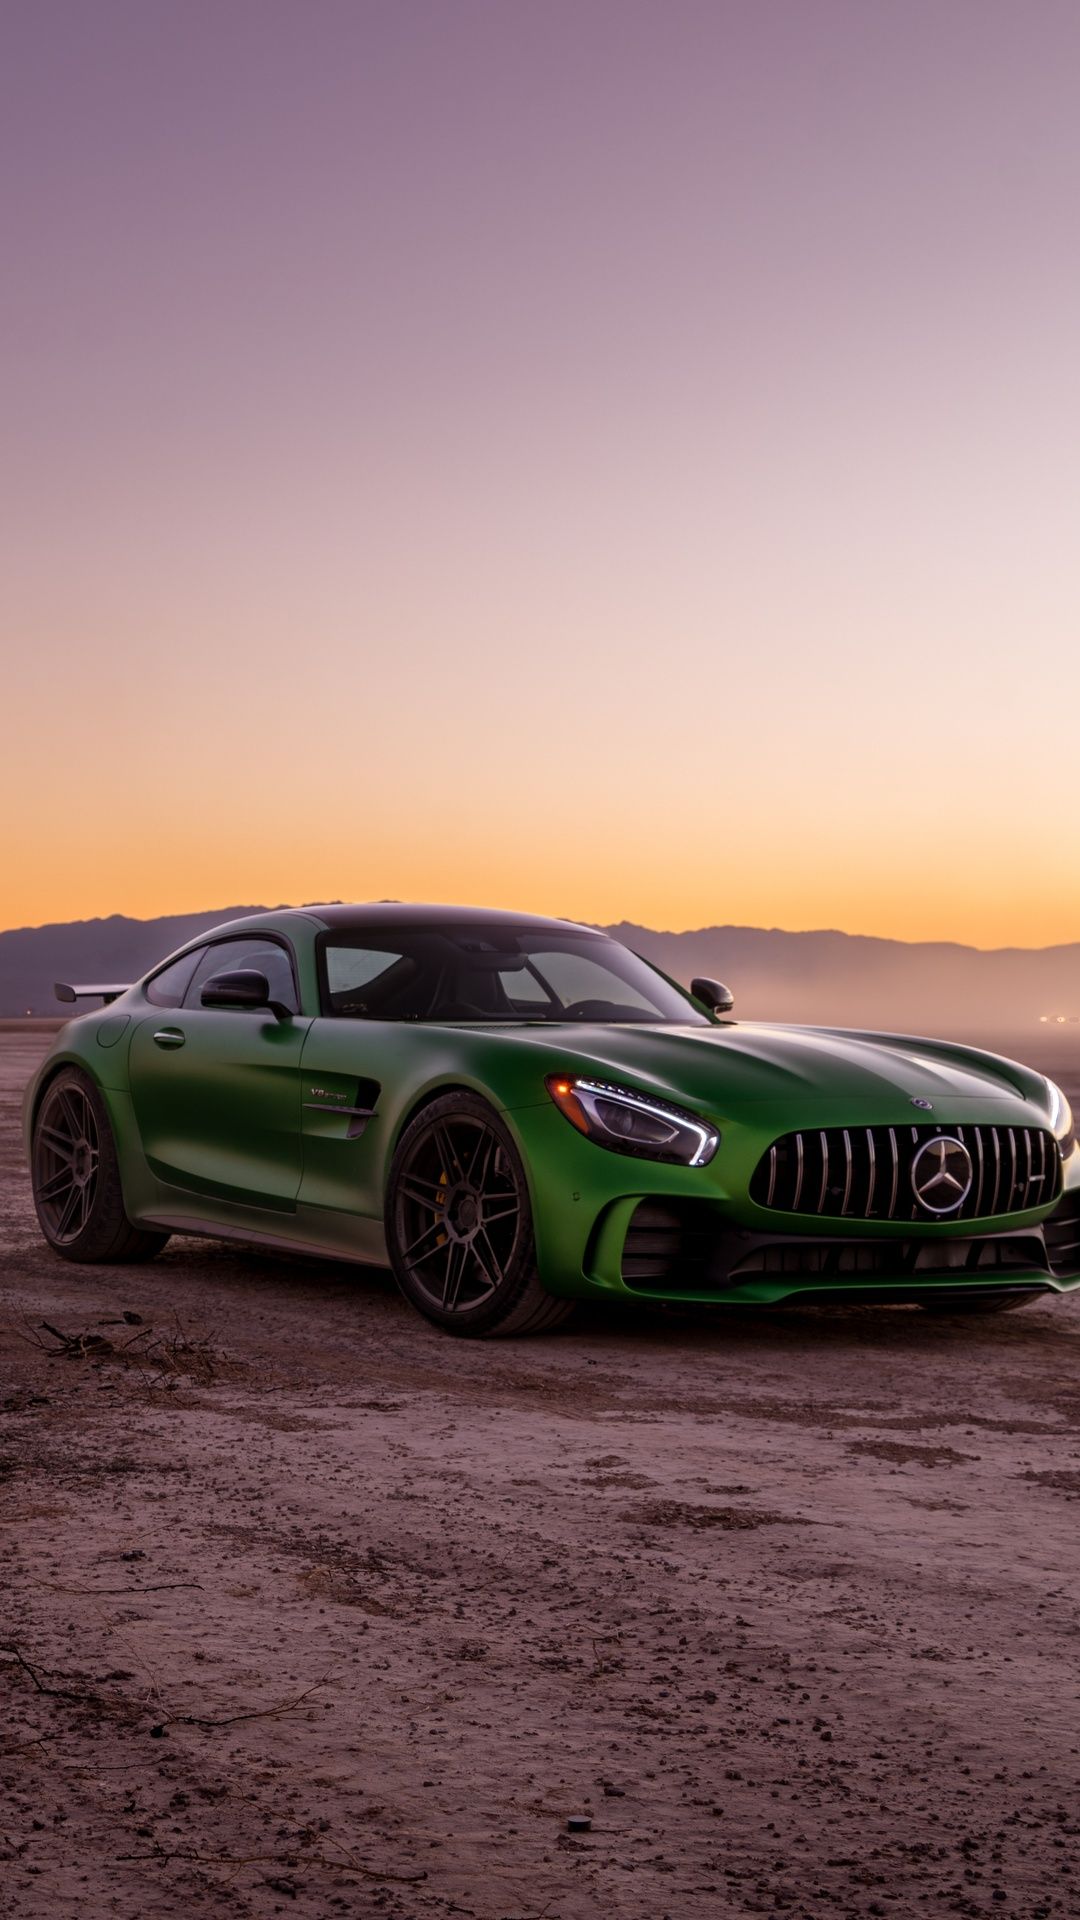 Mercedes Benz AMG GT Htc One Wallpaper, Free And Easy To